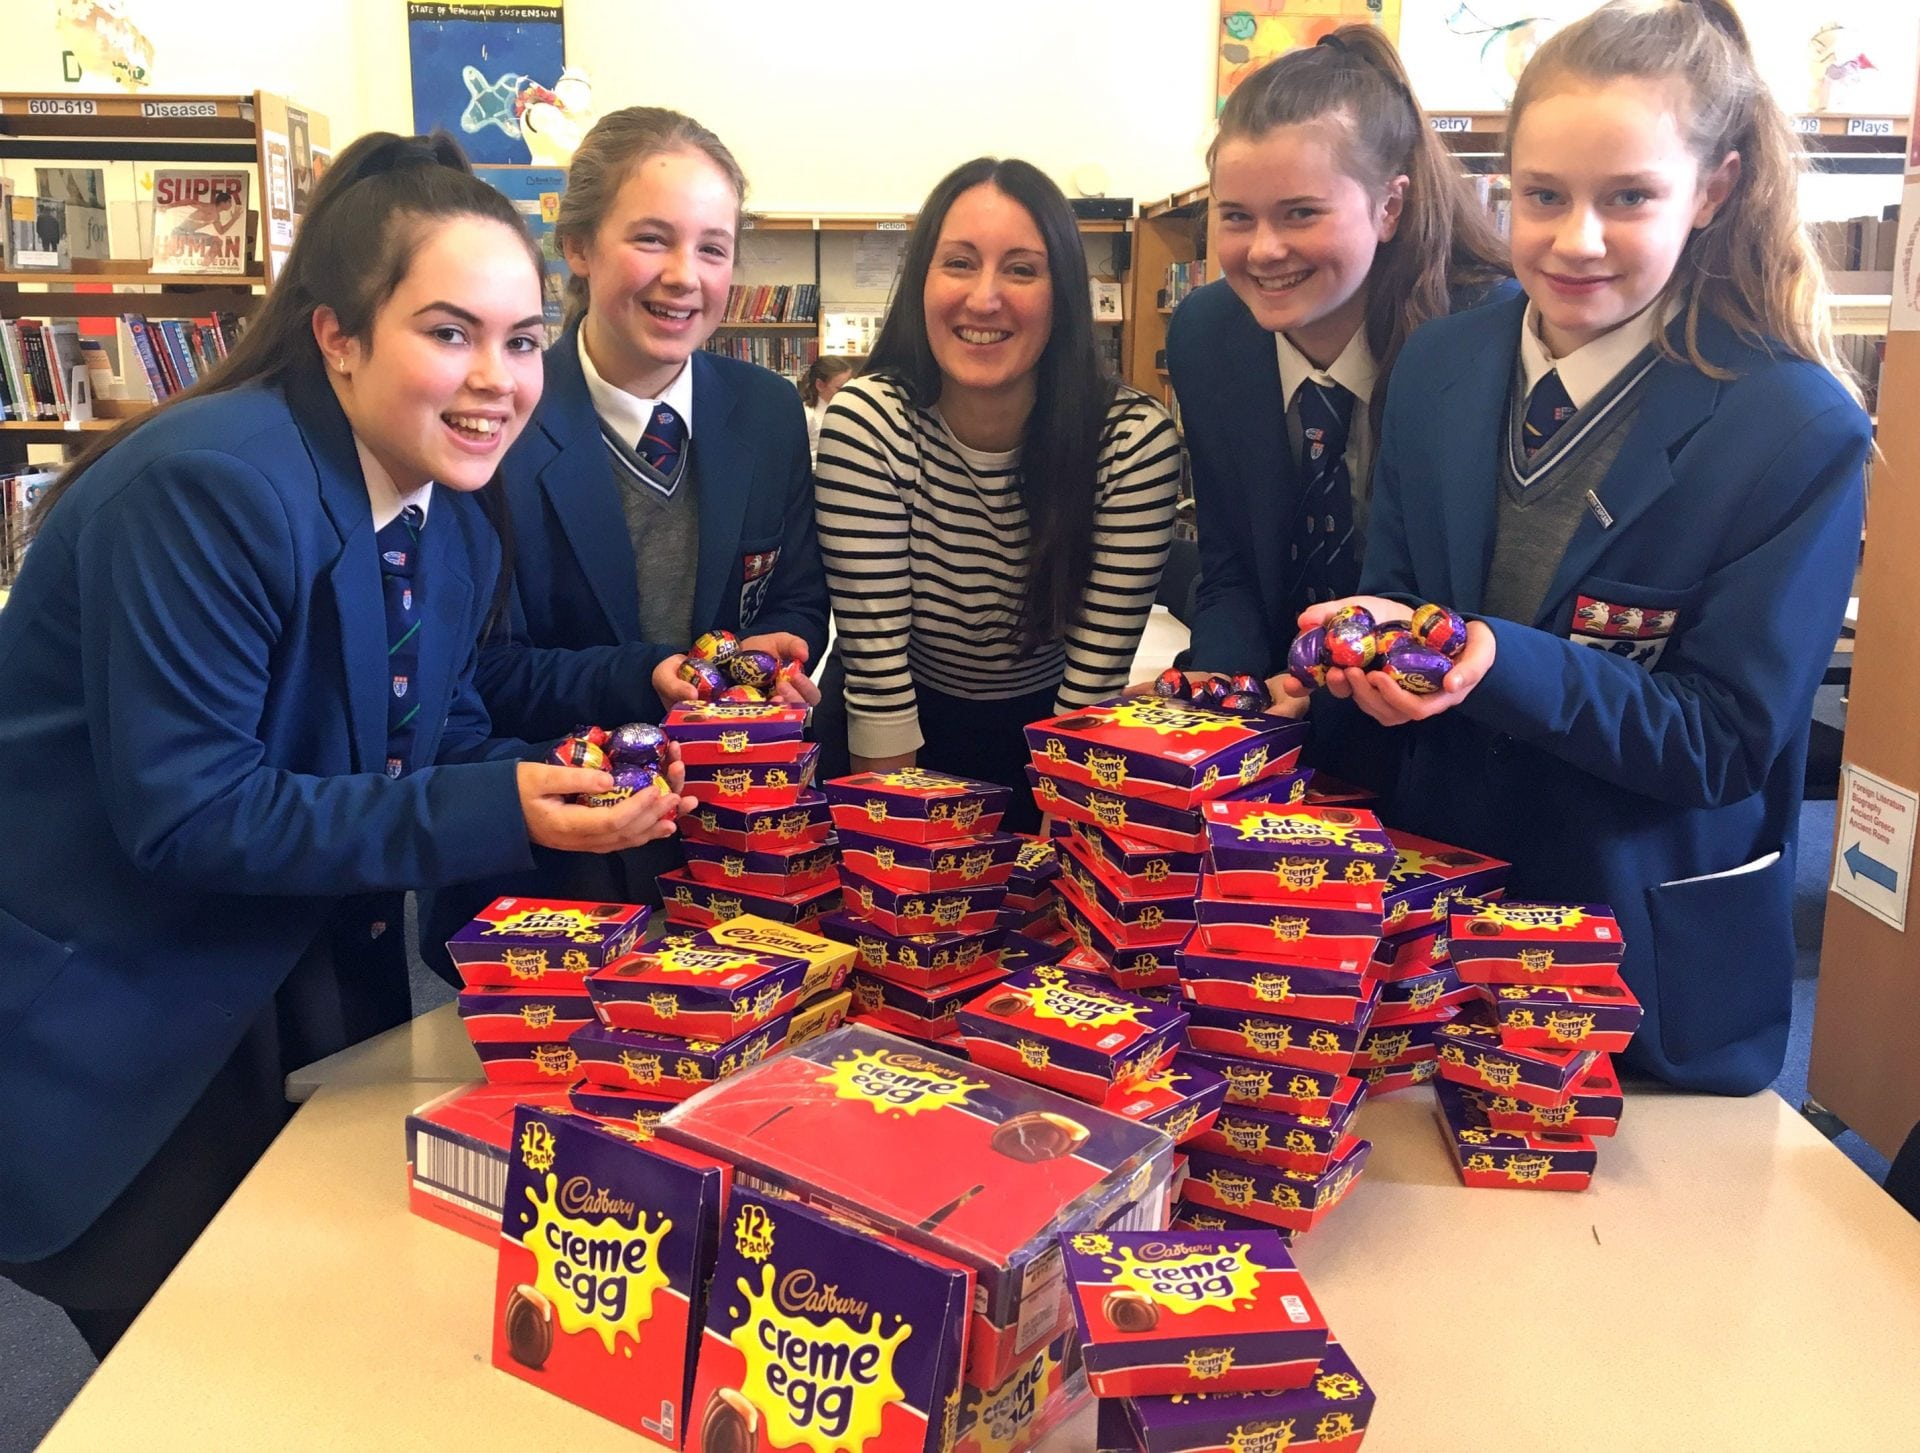 The Girls' Divison of The Kings School in Macclesfield donating 1191 eggs to Francis House fundraiser Lucy Thompson